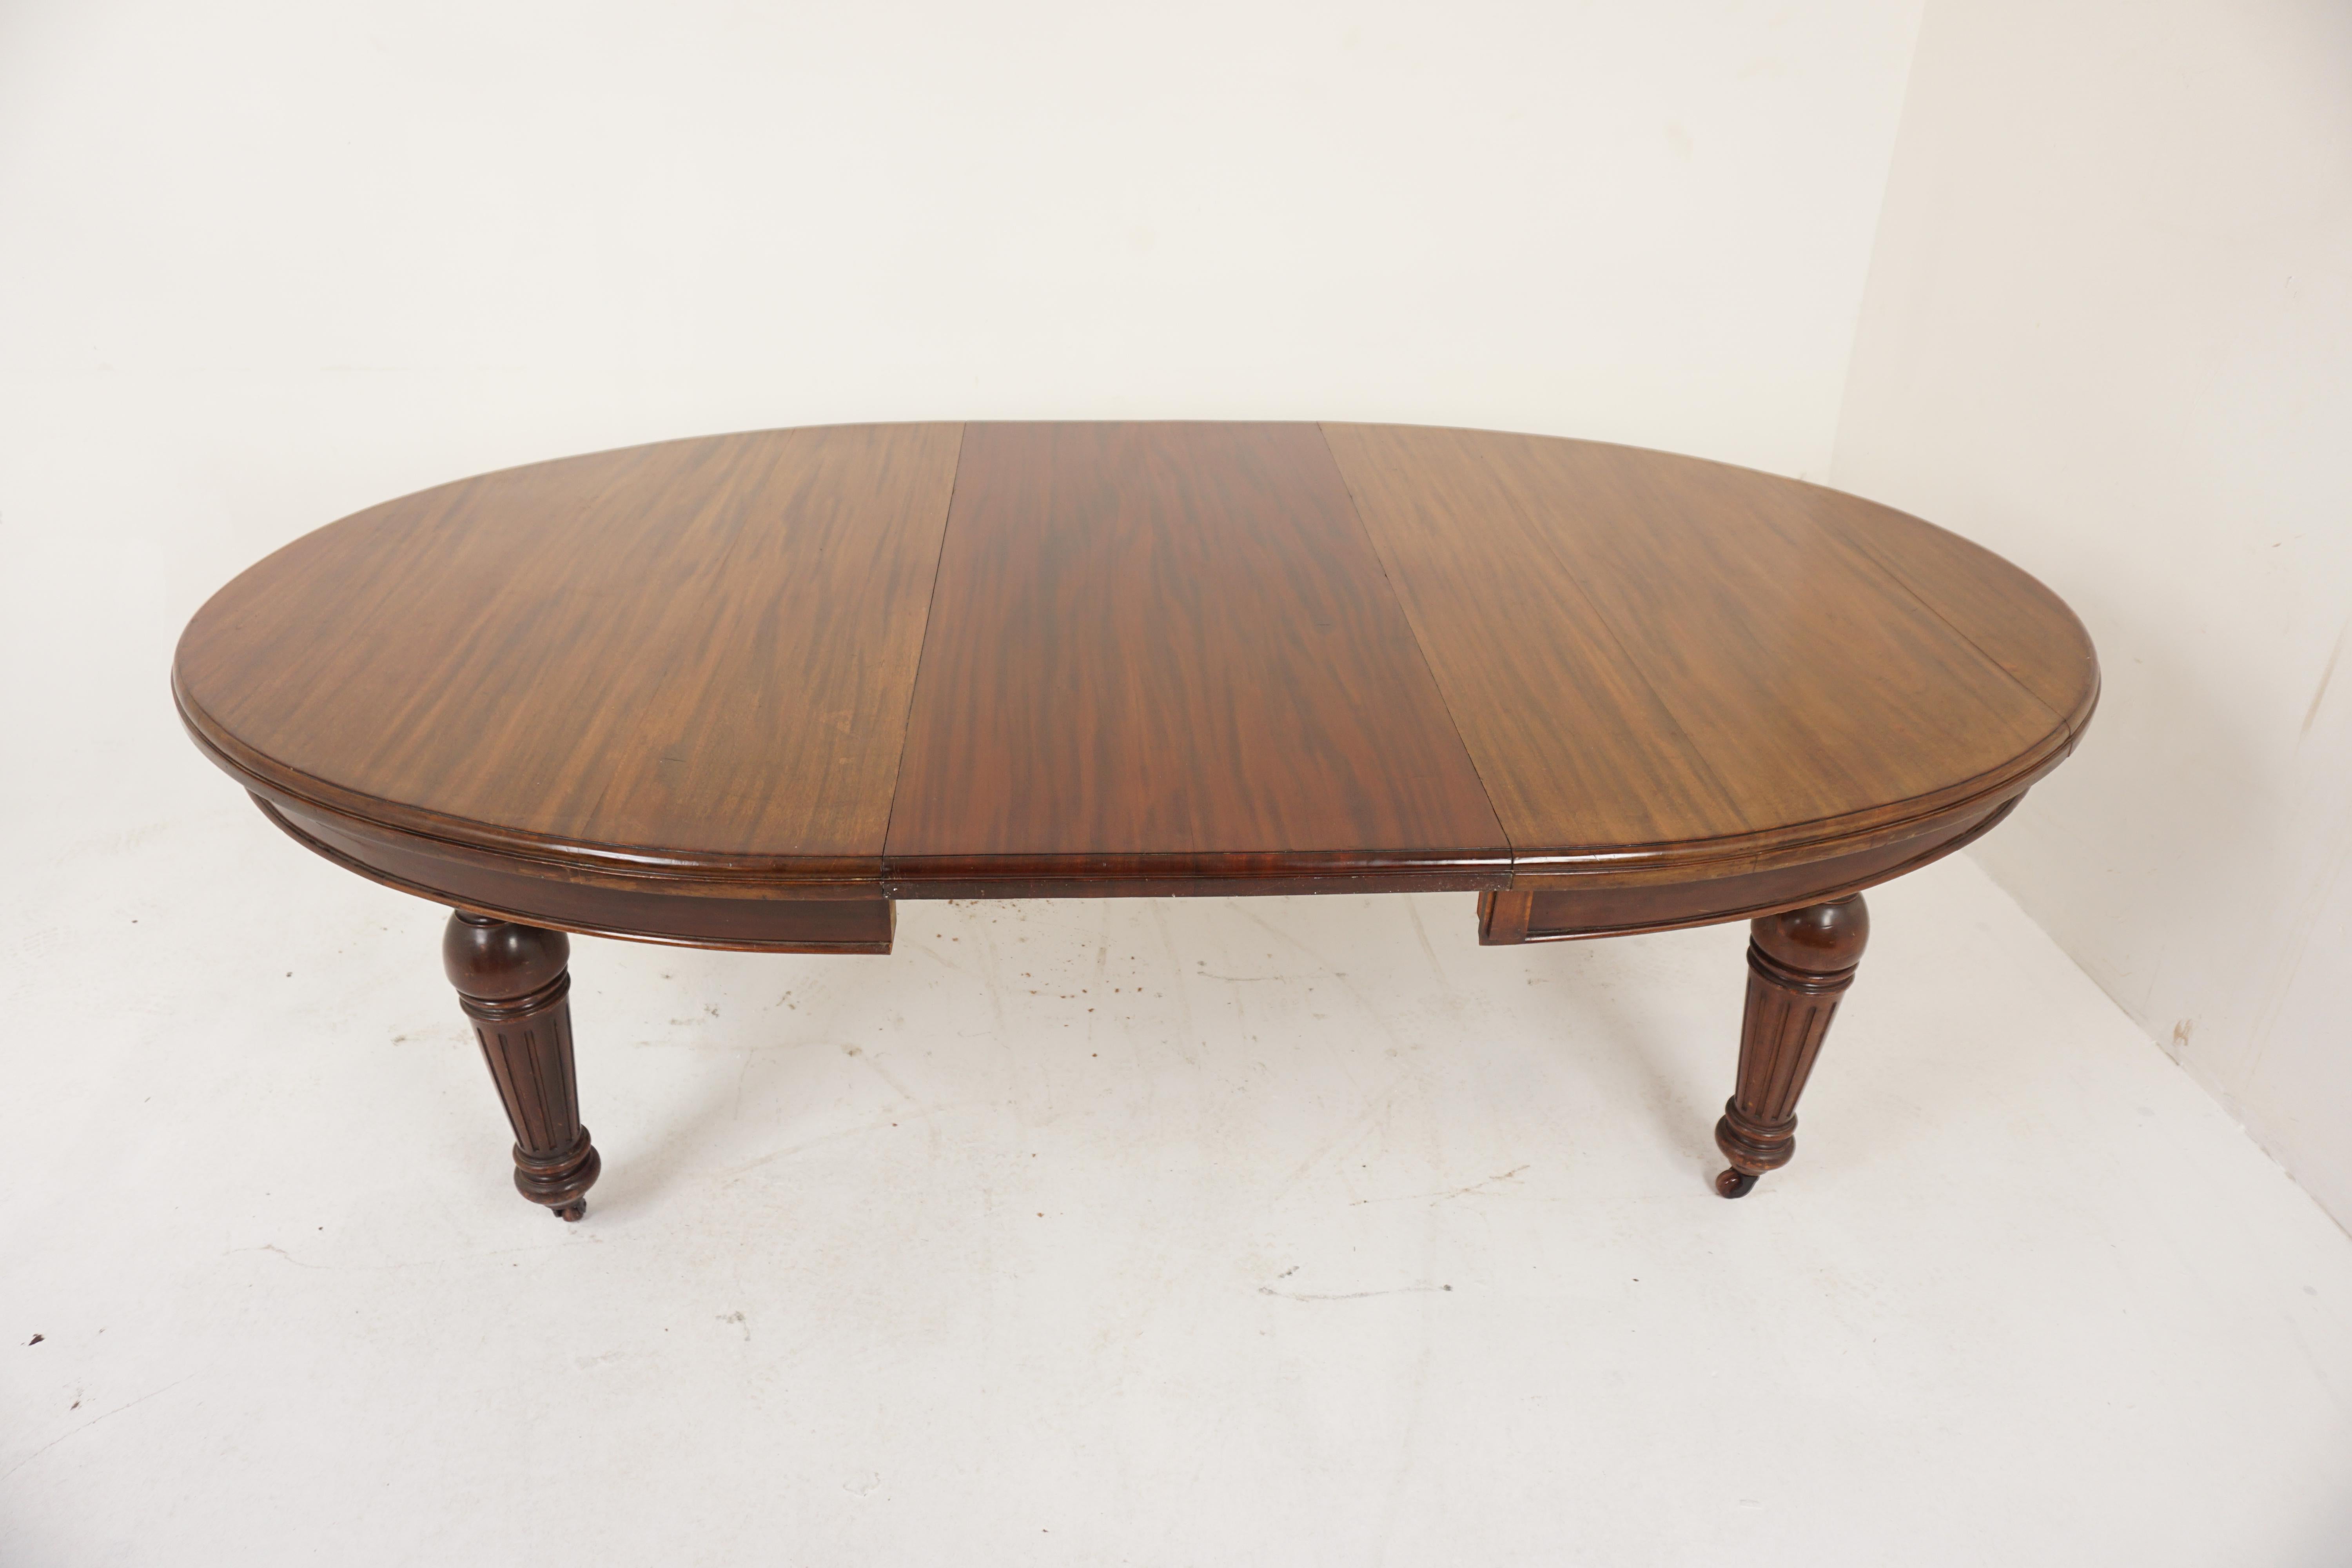 Antique Victorian Oval Mahogany Extending Dining Table With Leaf, Scotland 1860, H045

Scotland 11860
Solid mahogany
Original finish
Oval top with a nicely shaped edge and a corresponding skirt underneath
The legs are a classic turned shape with